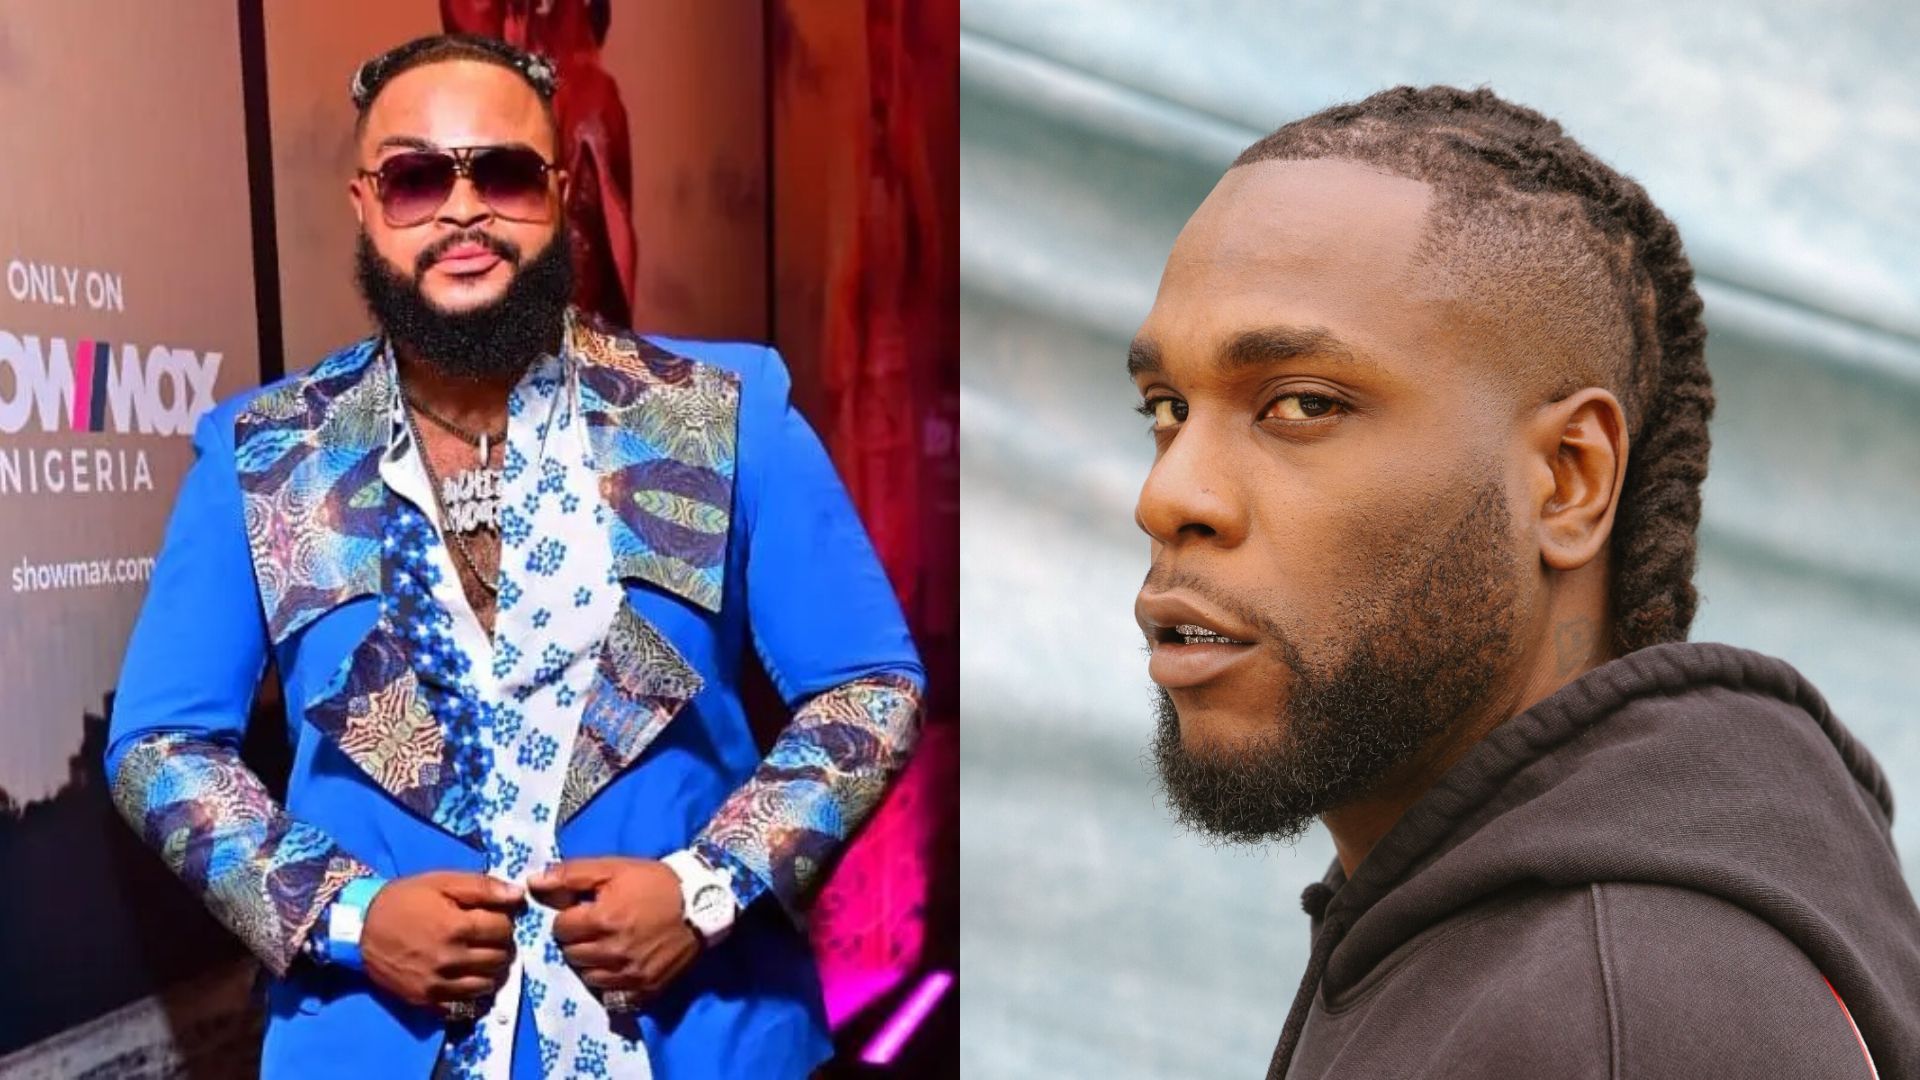 How bouncers prevented me from meeting Burna Boy - Whitemoney - Daily Post Nigeria